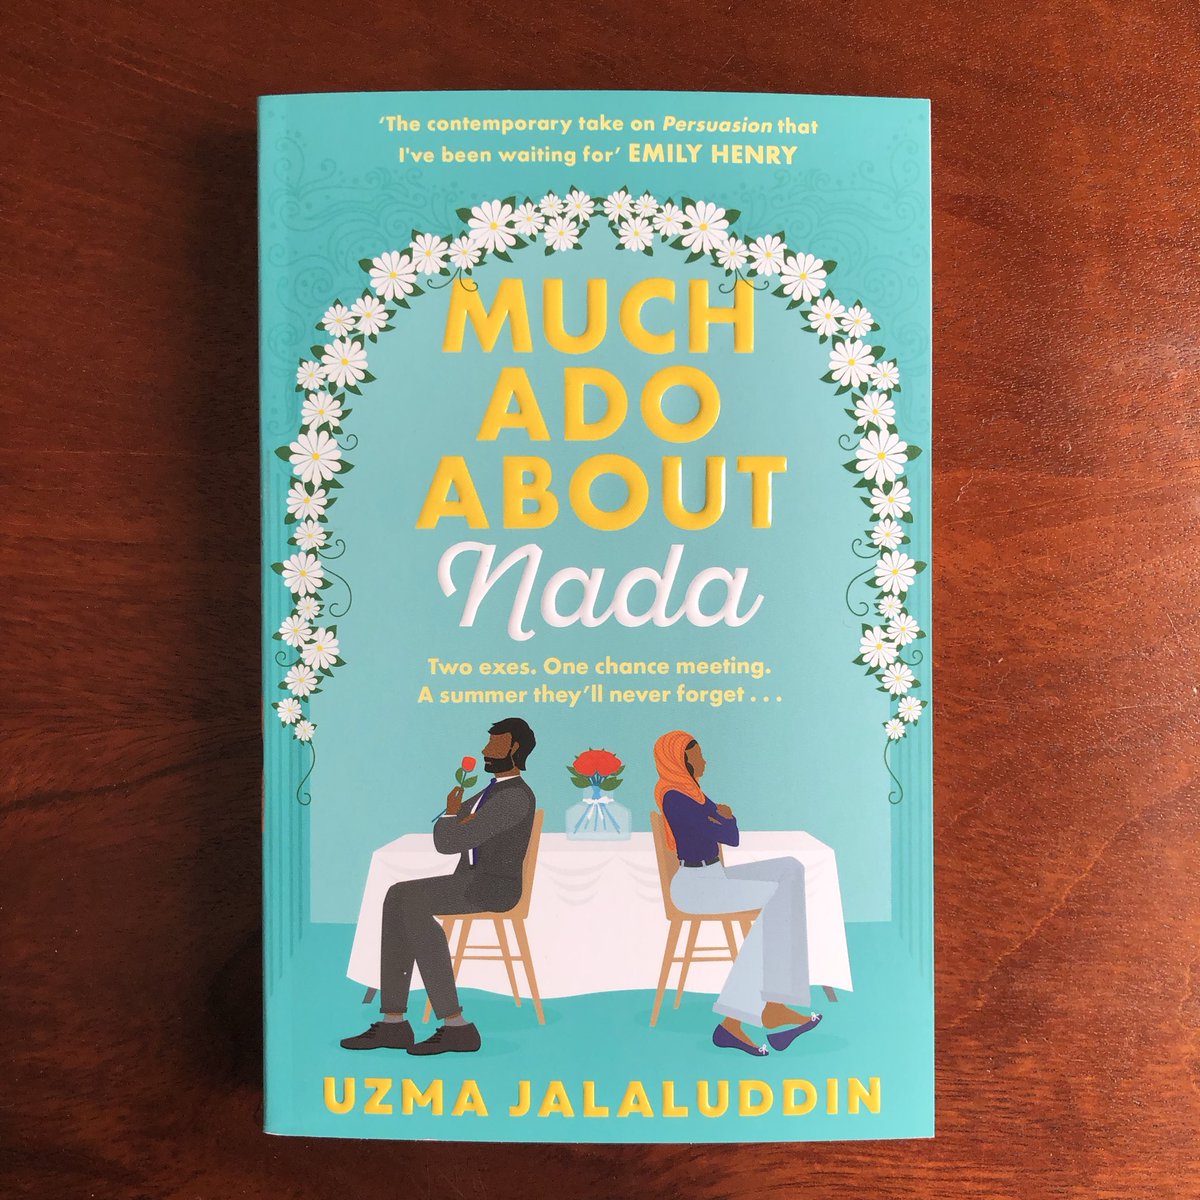 Thank you to @sofeeeee for a copy of #MuchAdoAboutNada by @UzmaWrites 

Persuasion with a desi twist. Count me in!

Published 6th July